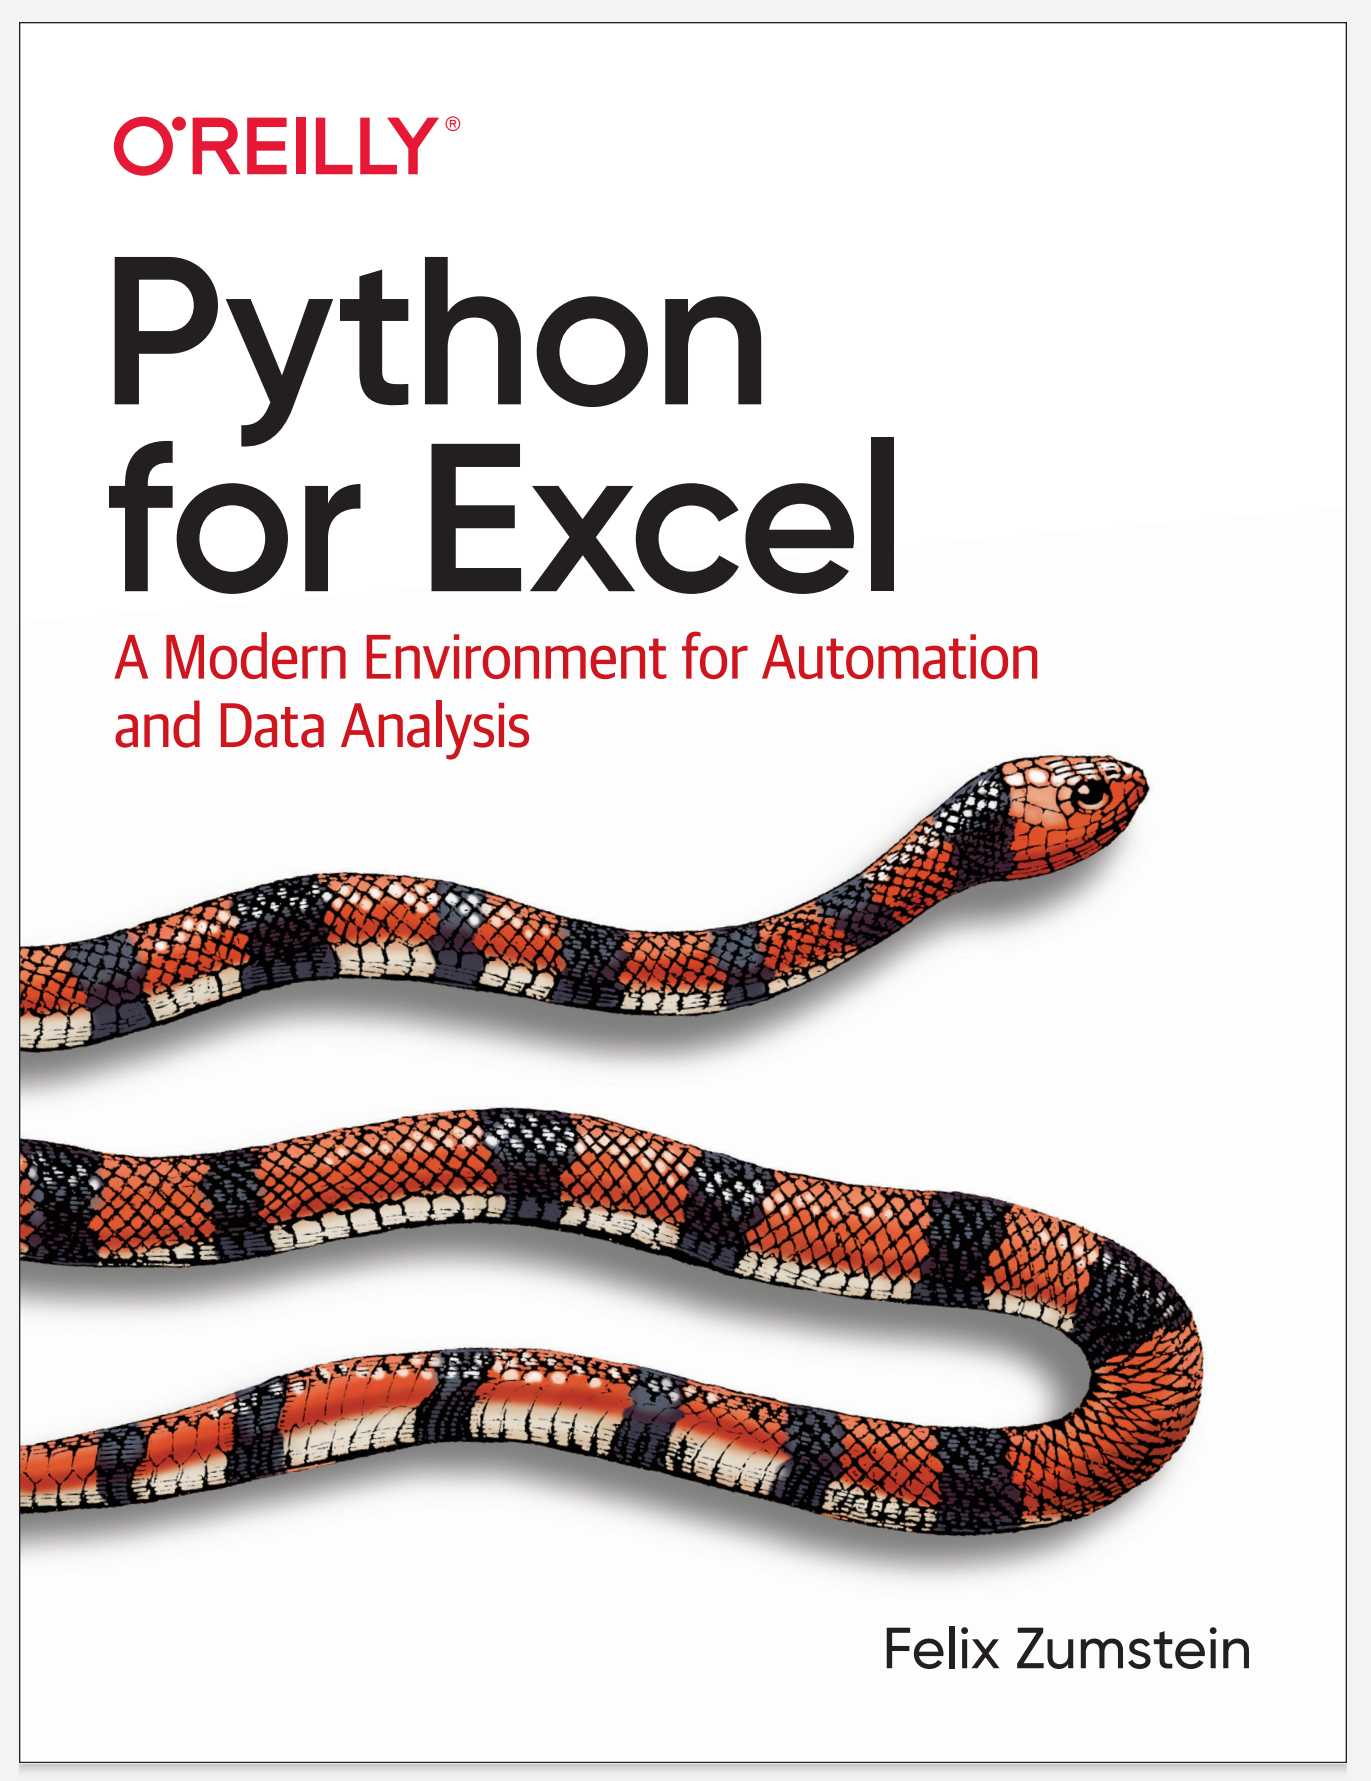 Python for Excel: A Modern Environment for Automation and Data Analysis Free PDF 2022